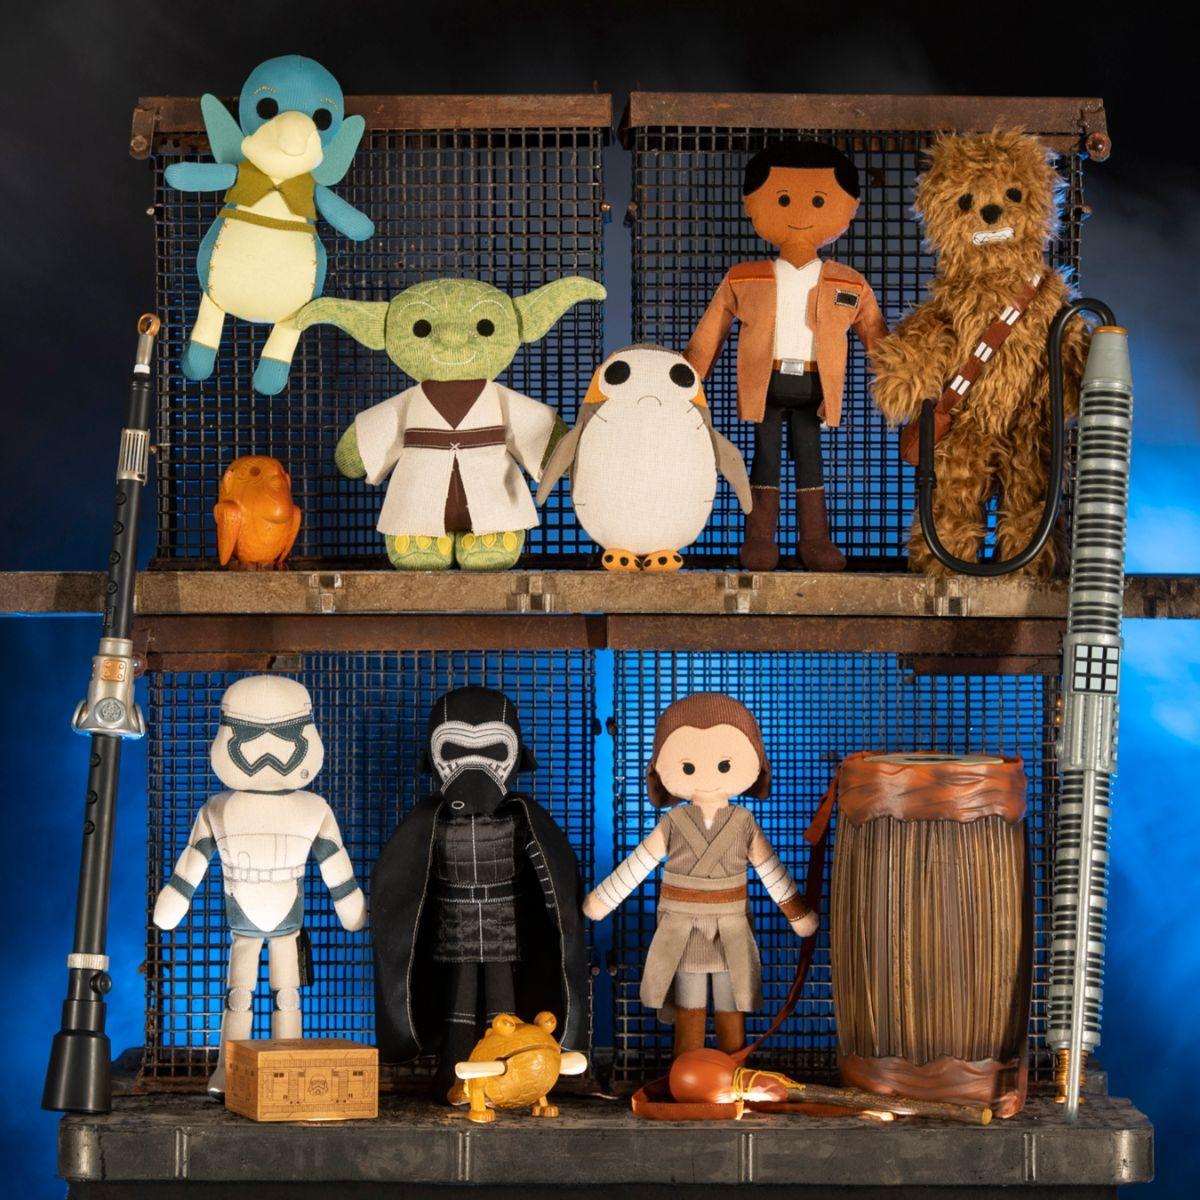 19. Star Wars plush, including Watto for some reason